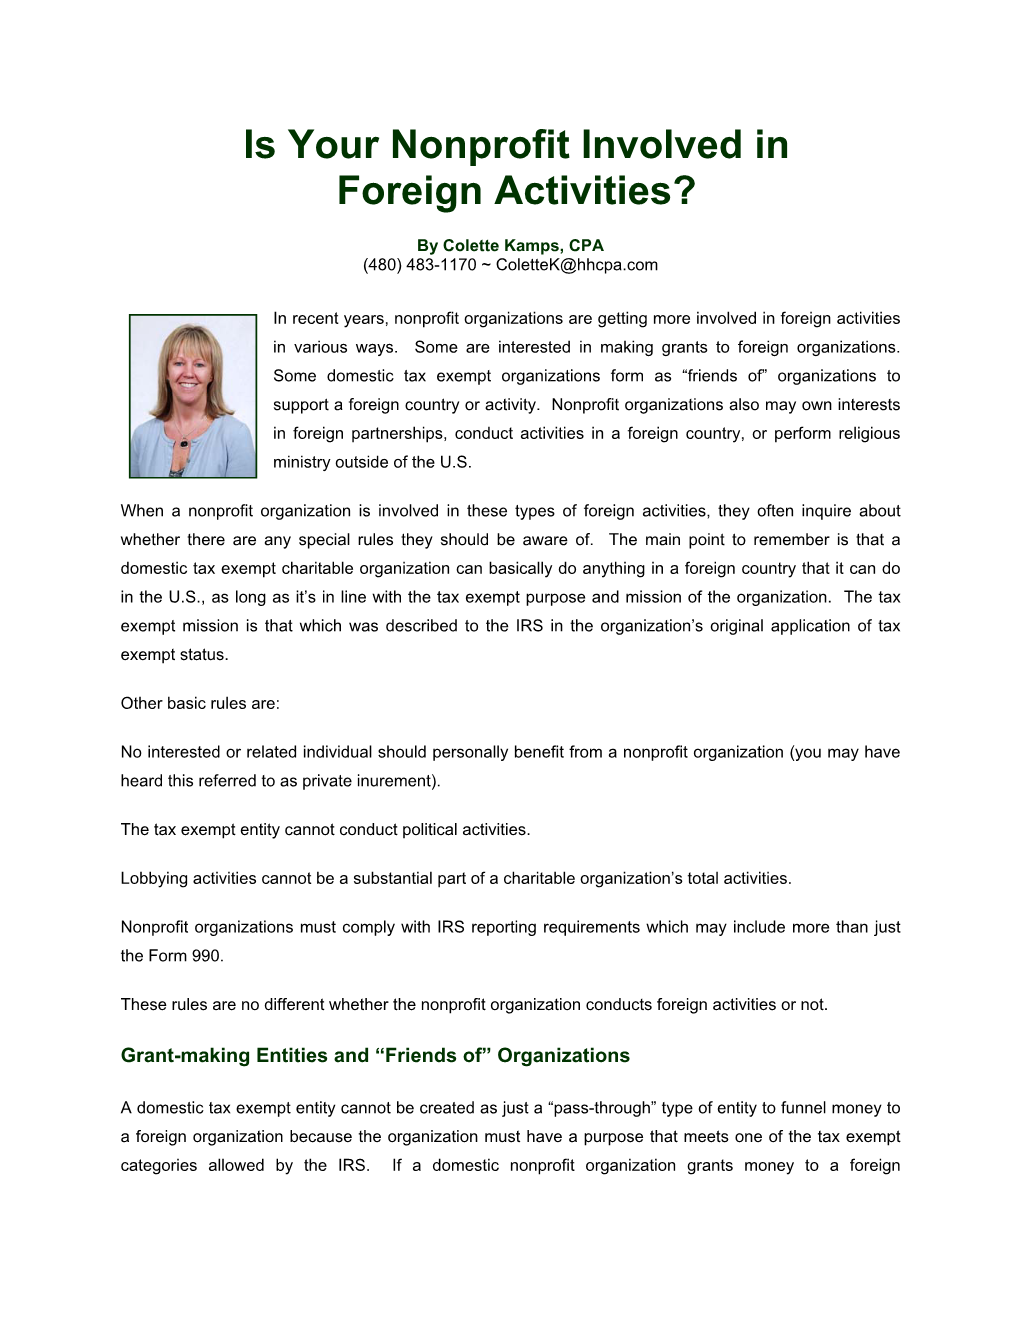 Is Your Nonprofit Involved in Foreign Activities?